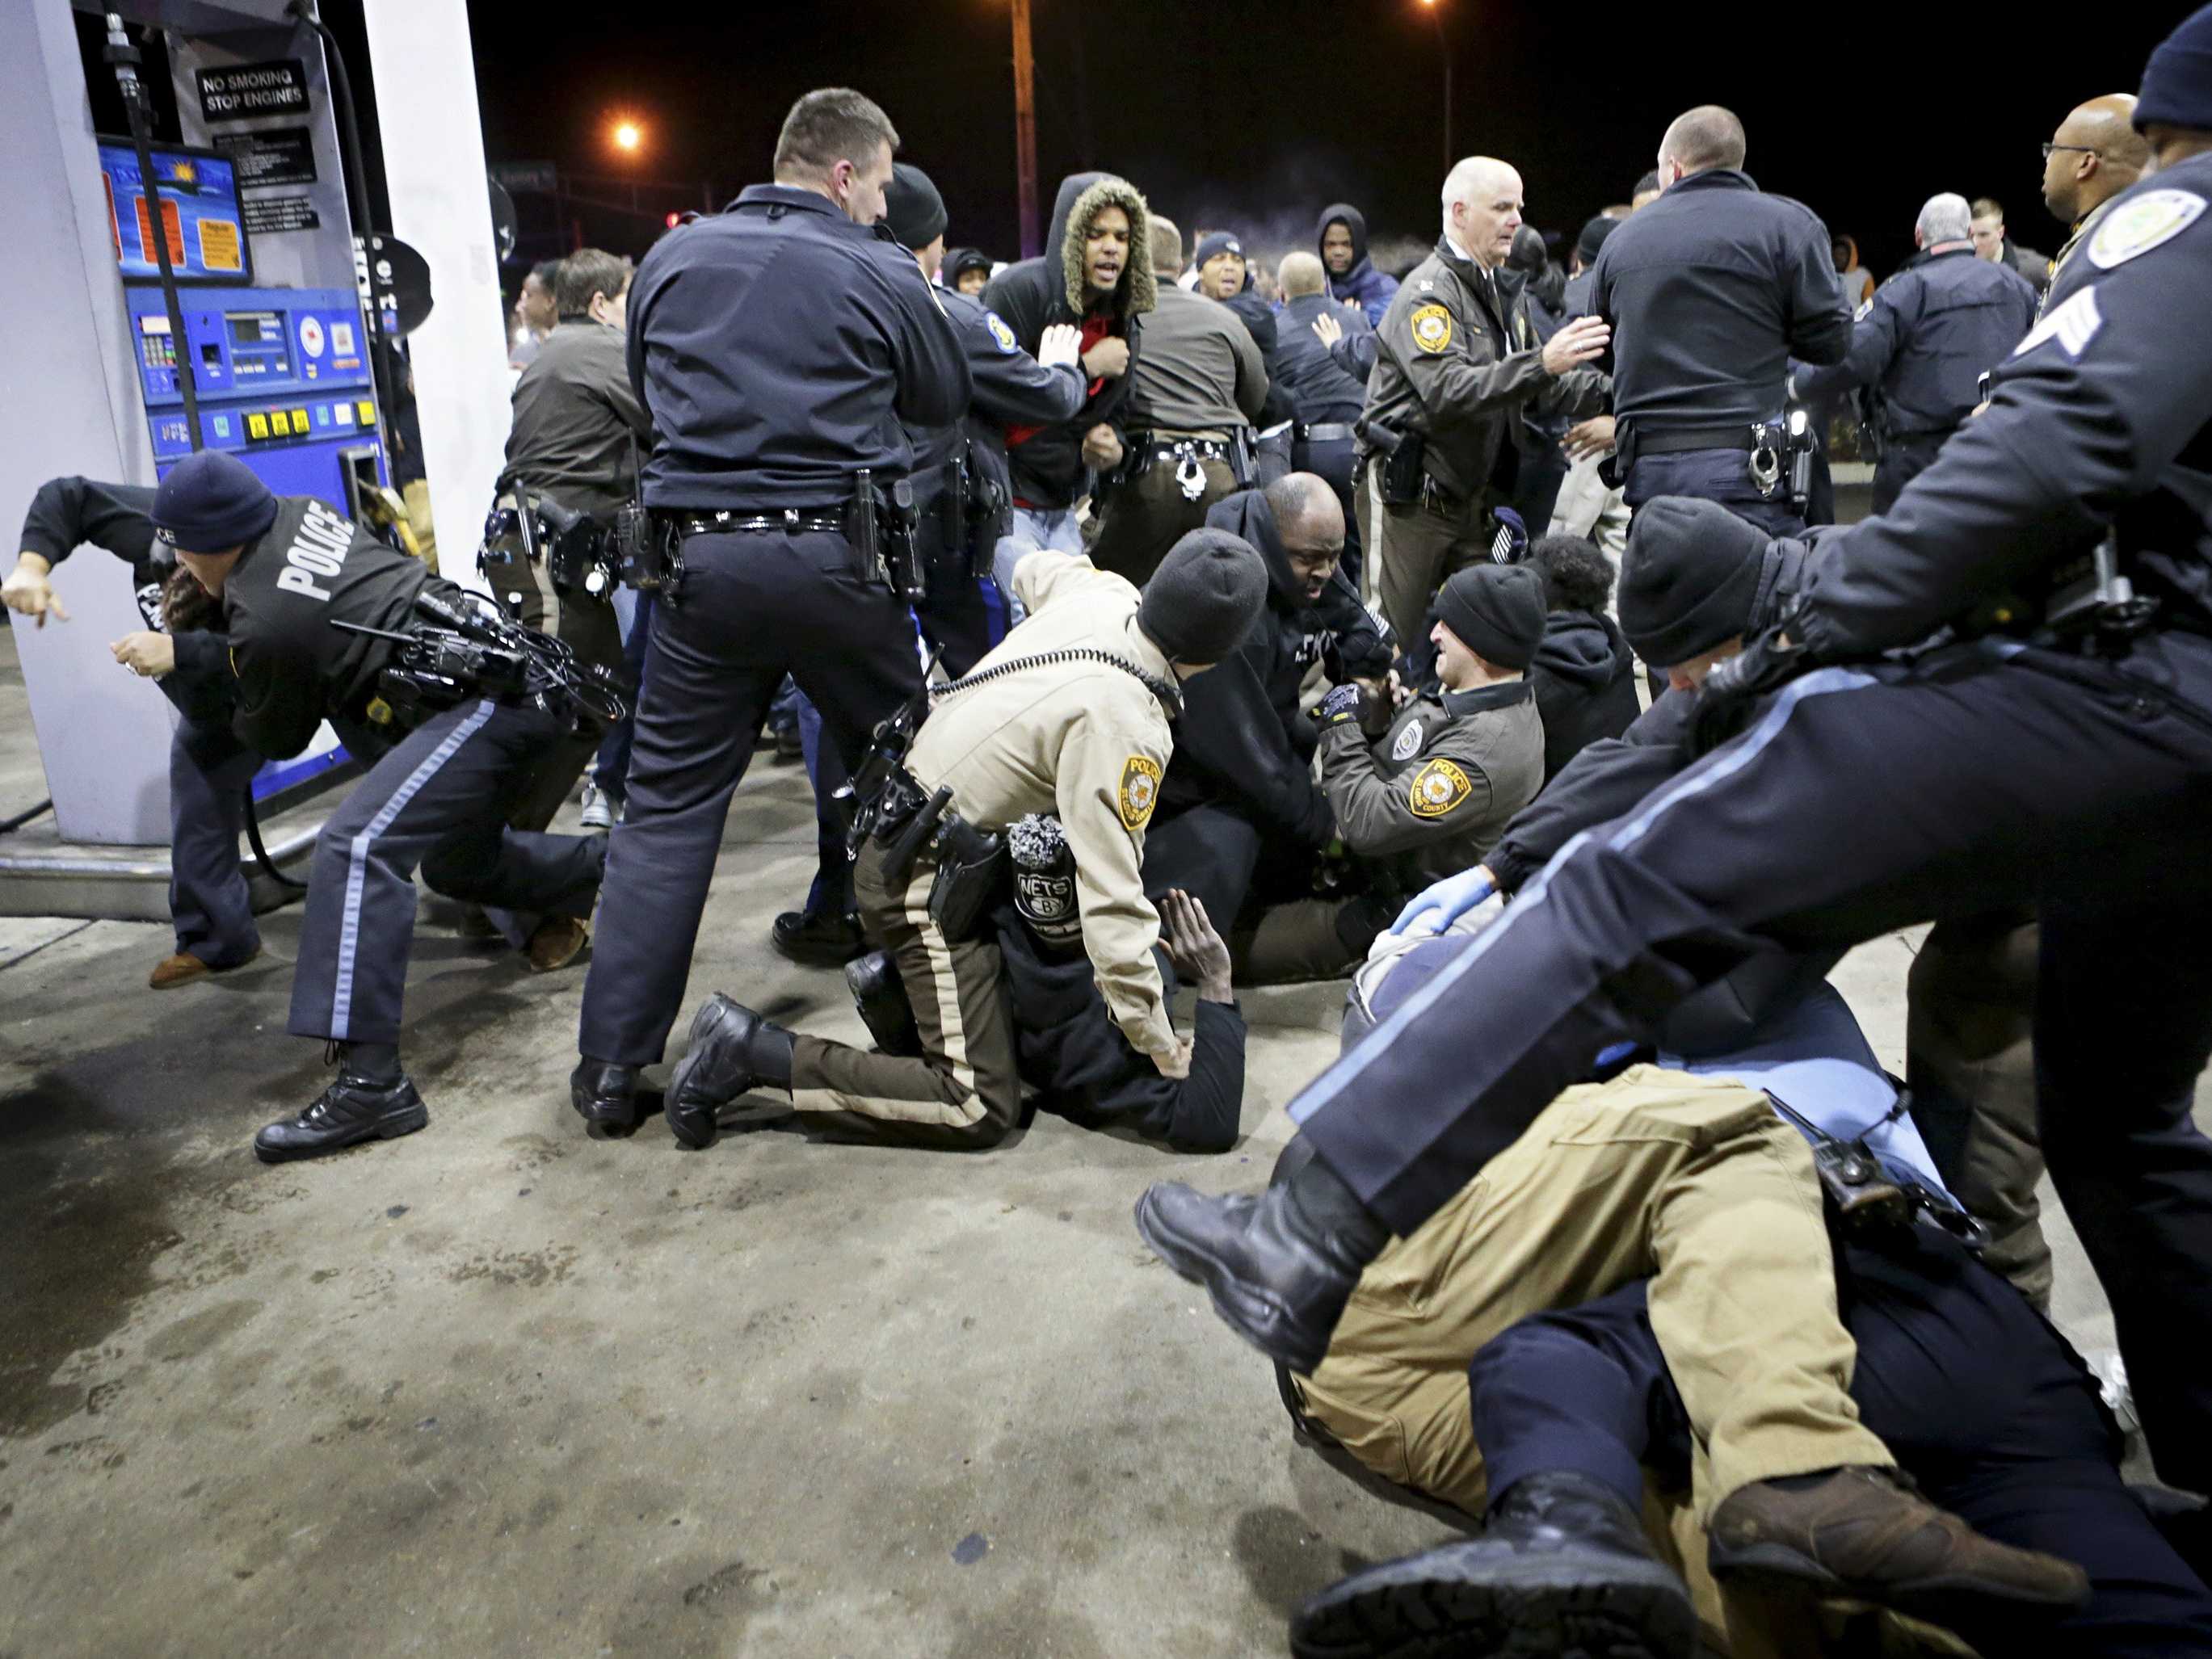 protests-have-started-again-in-st-louis-after-cops-fatally-shot-a-black-teenager